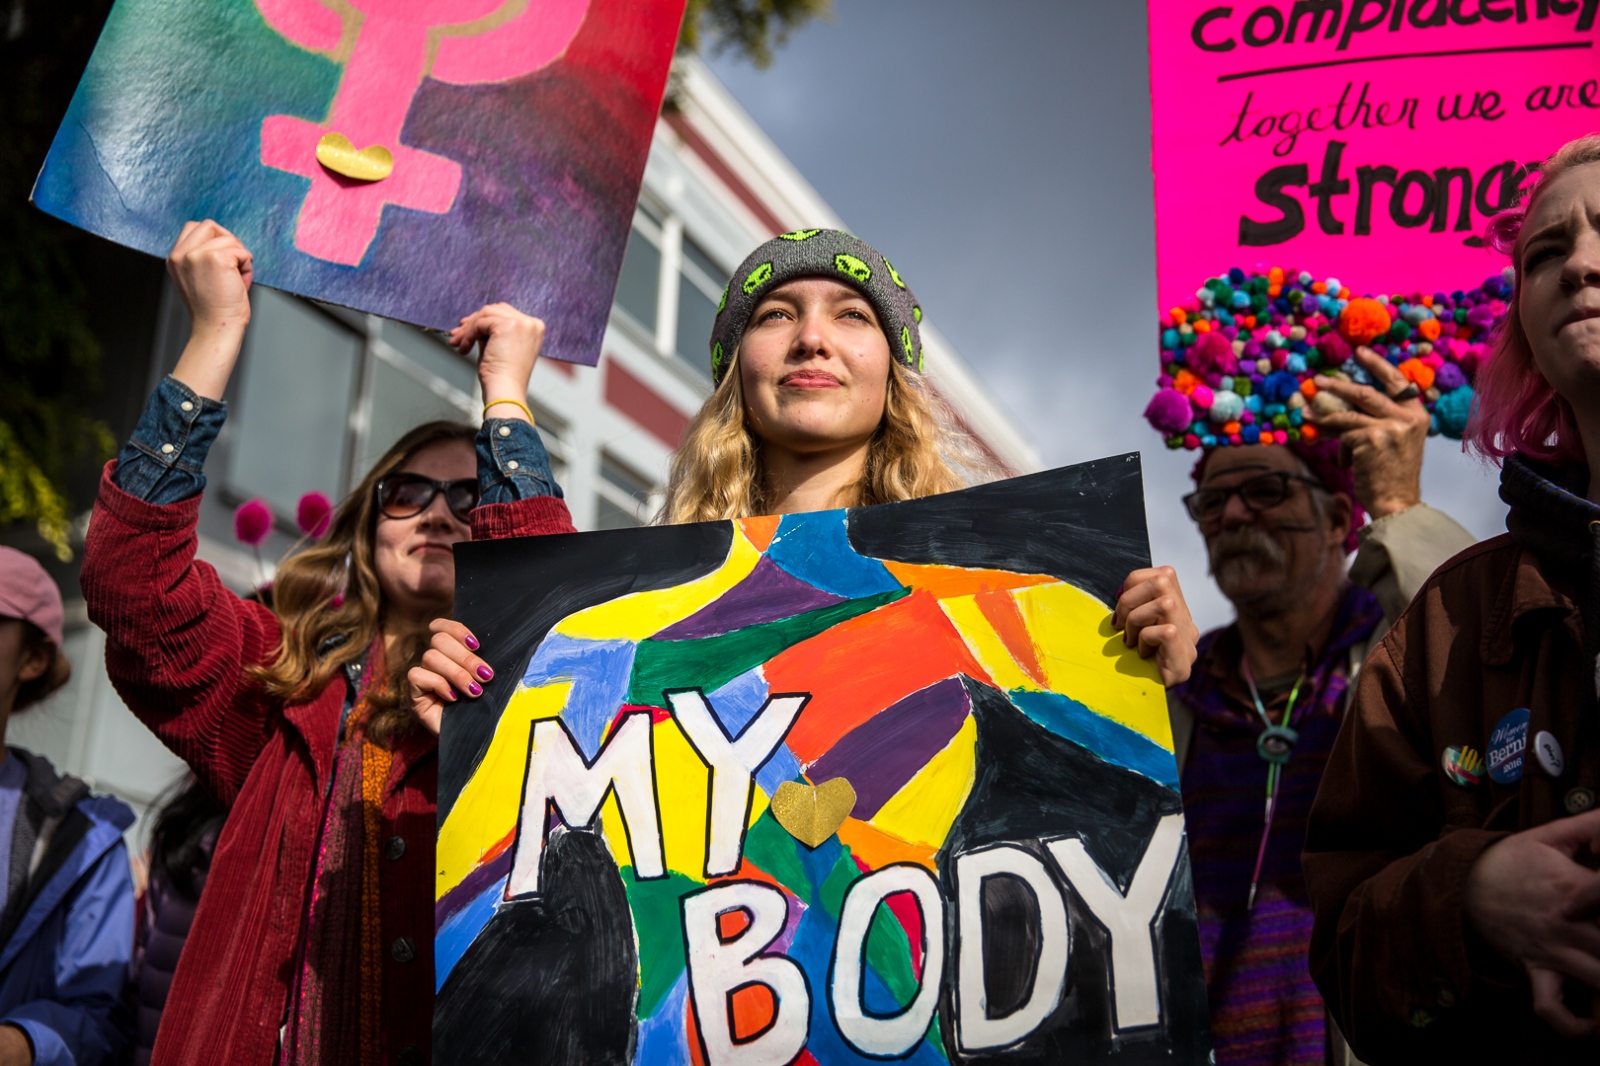 Demonstrators during the Women's March in Oakland, CA, January 21, 2017.